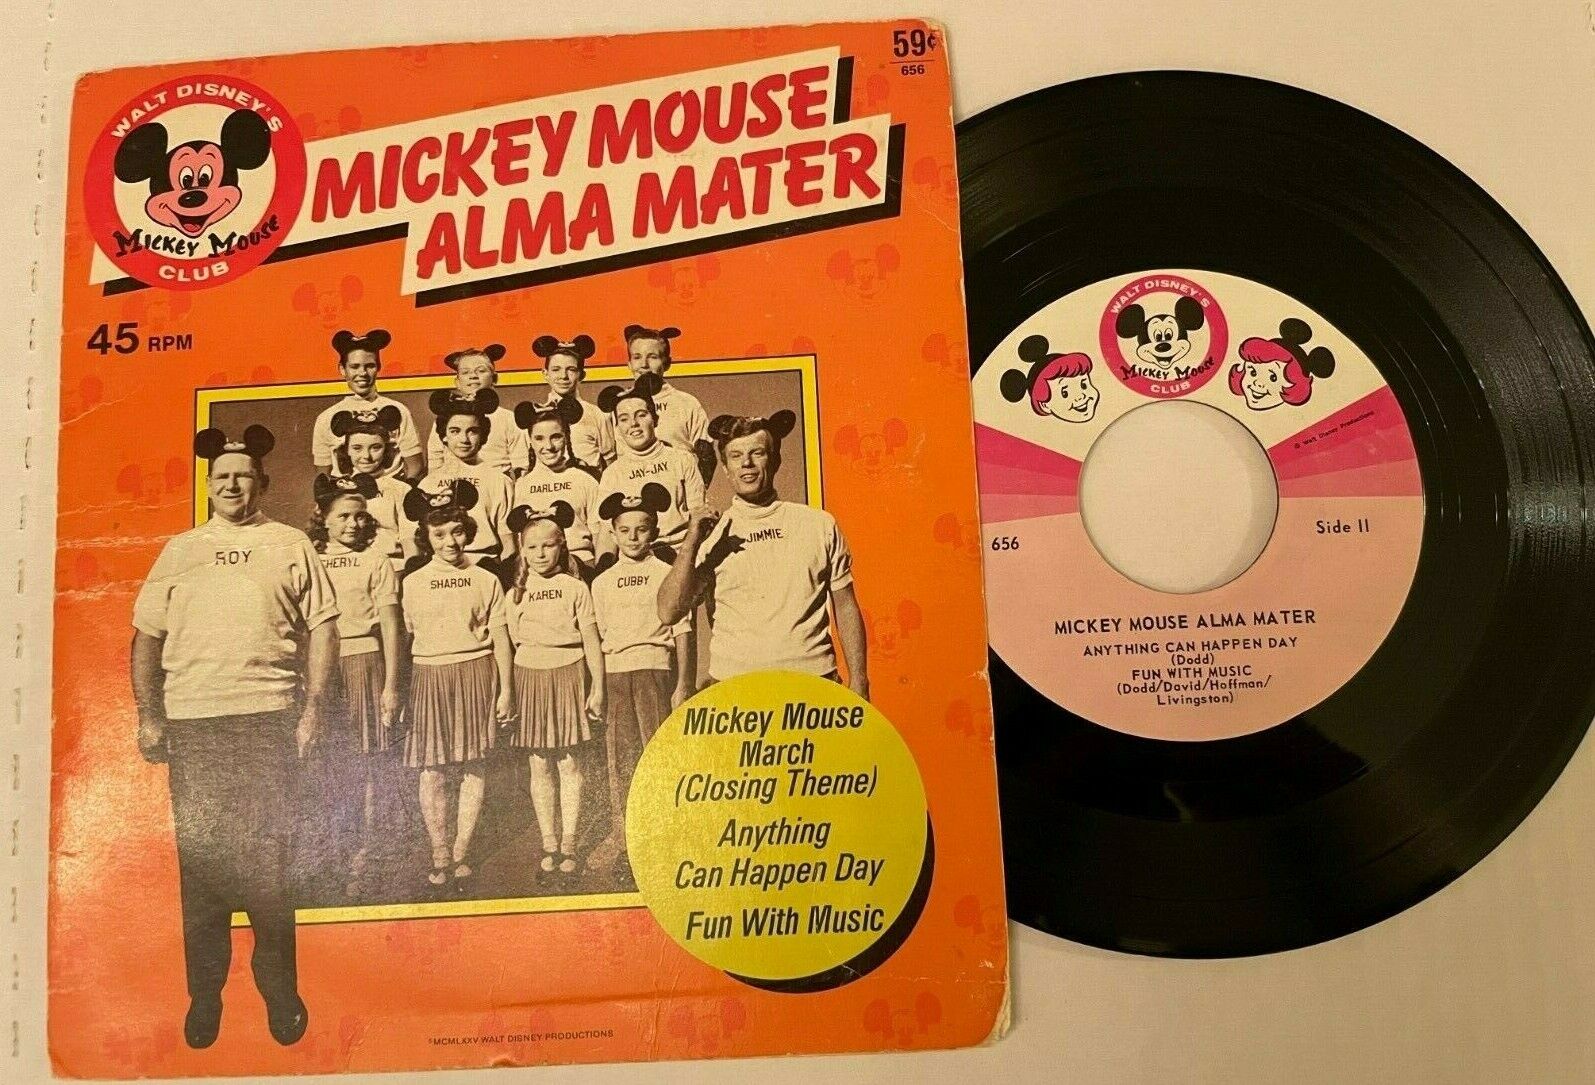 Mickey Mouse Club Mickey Mouse Alma Mater Vinyl Record Vintage 45 RPM 1975